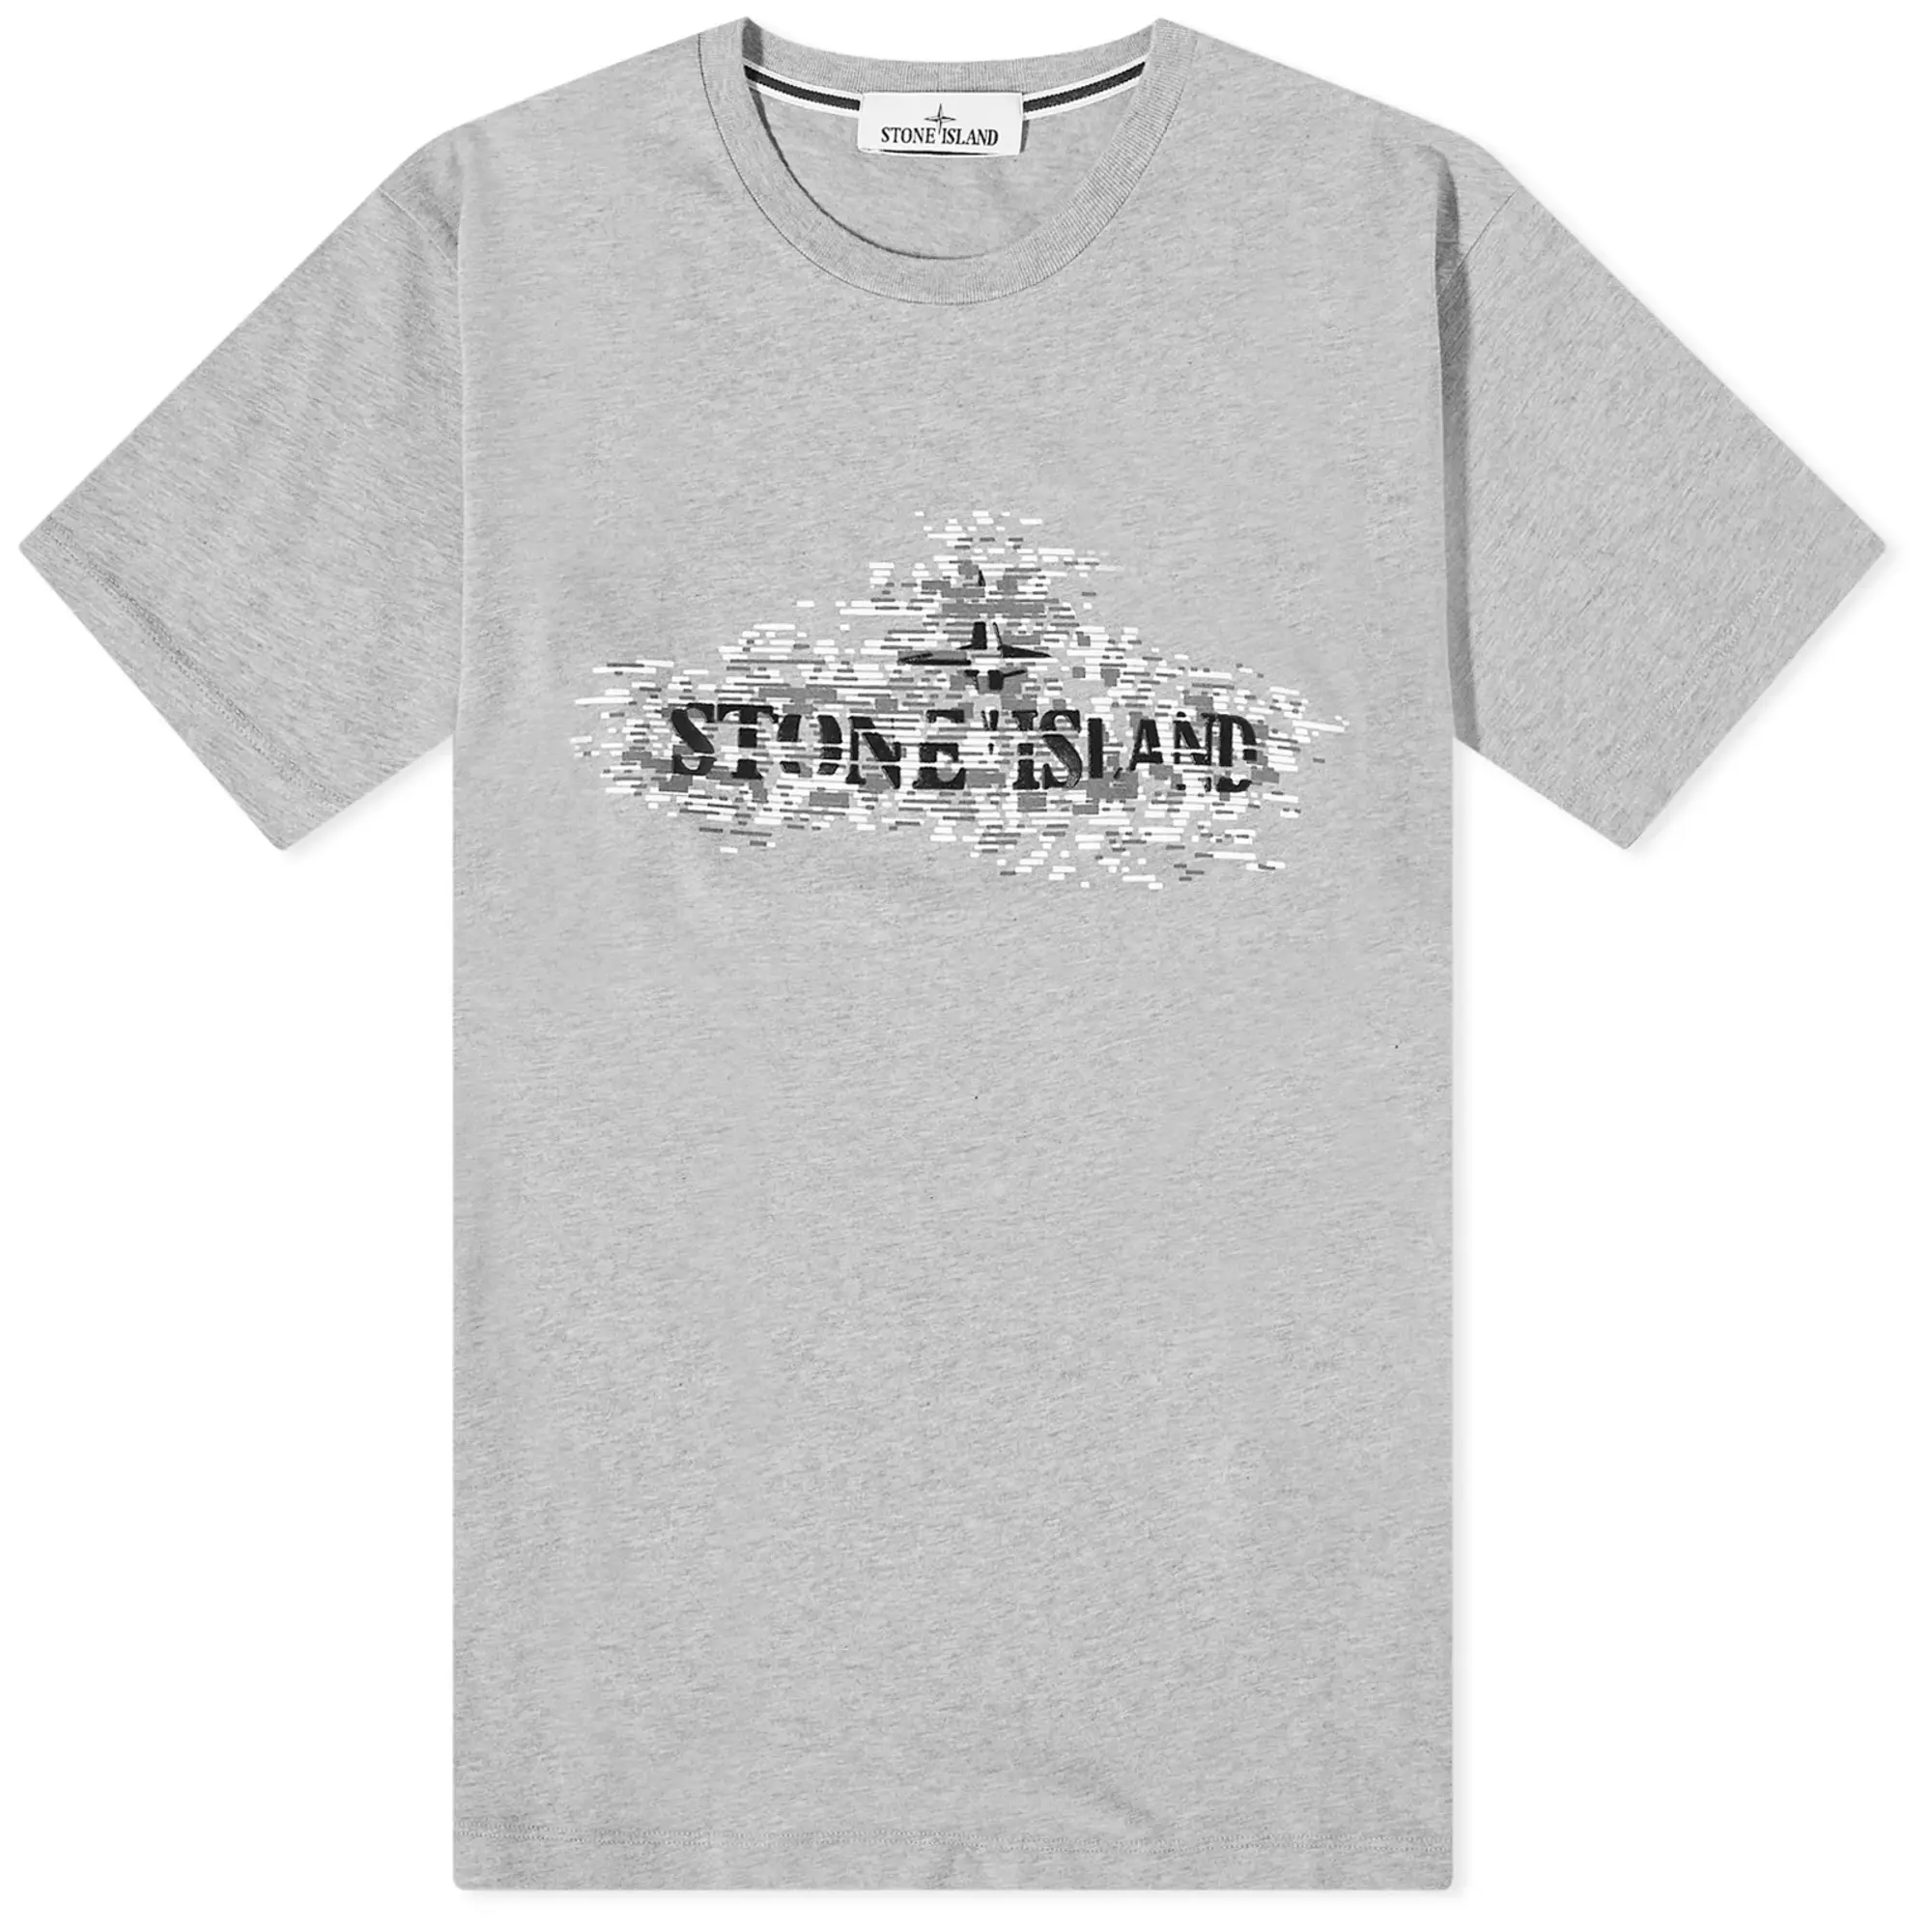 Stone Island Men's Institutional Two Graphic T-Shirt Grey Marl